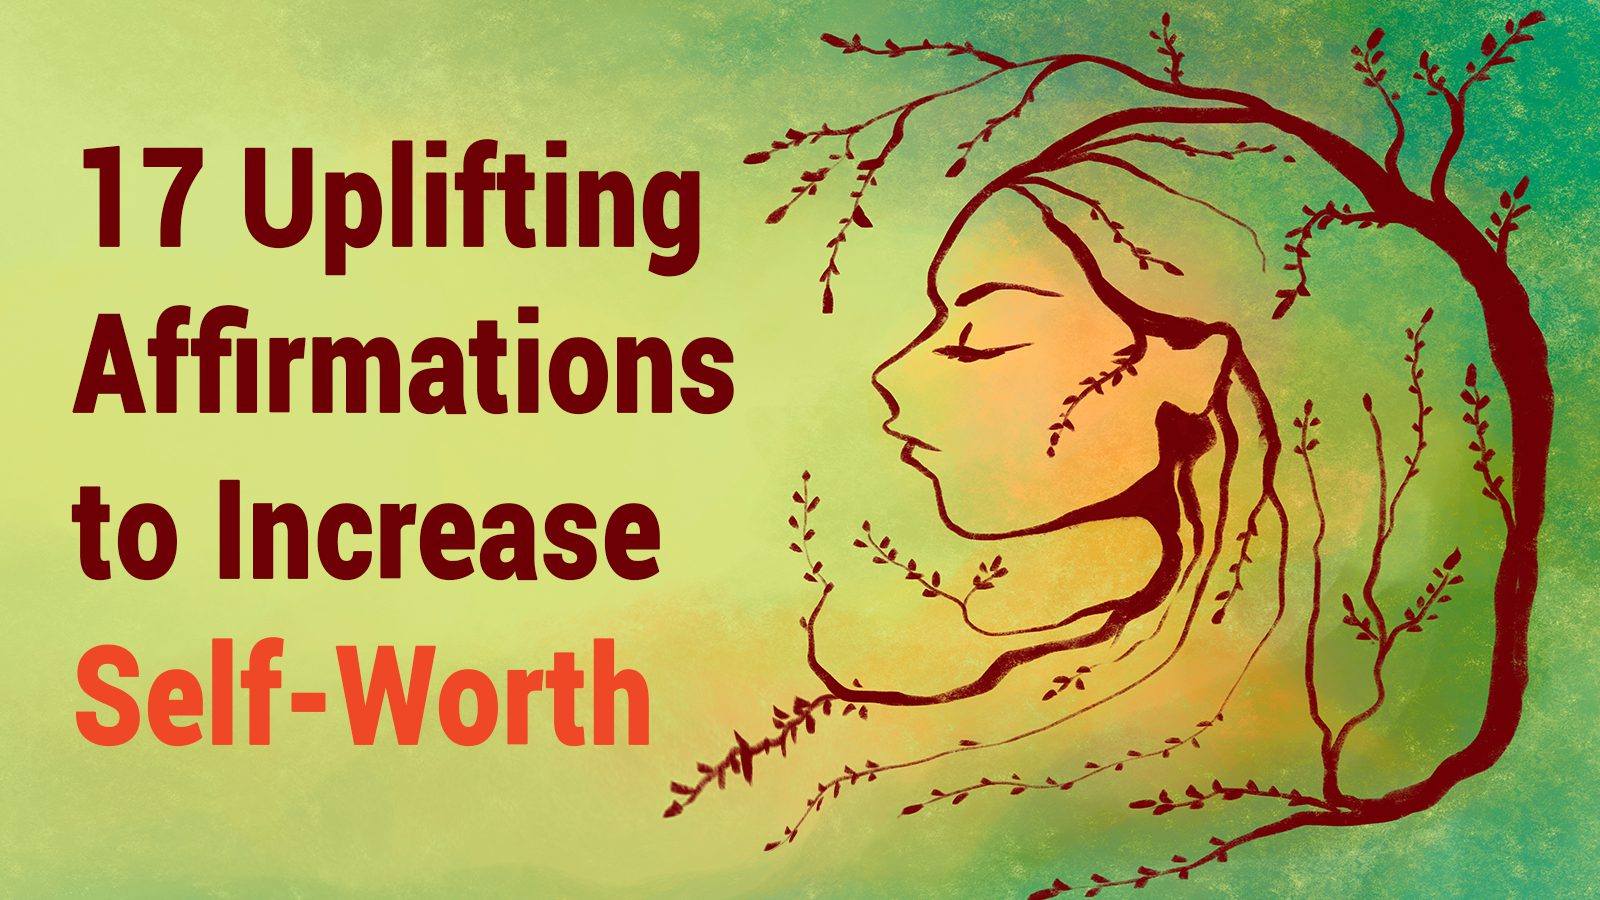 17 Uplifting Affirmations to Increase Self-Worth